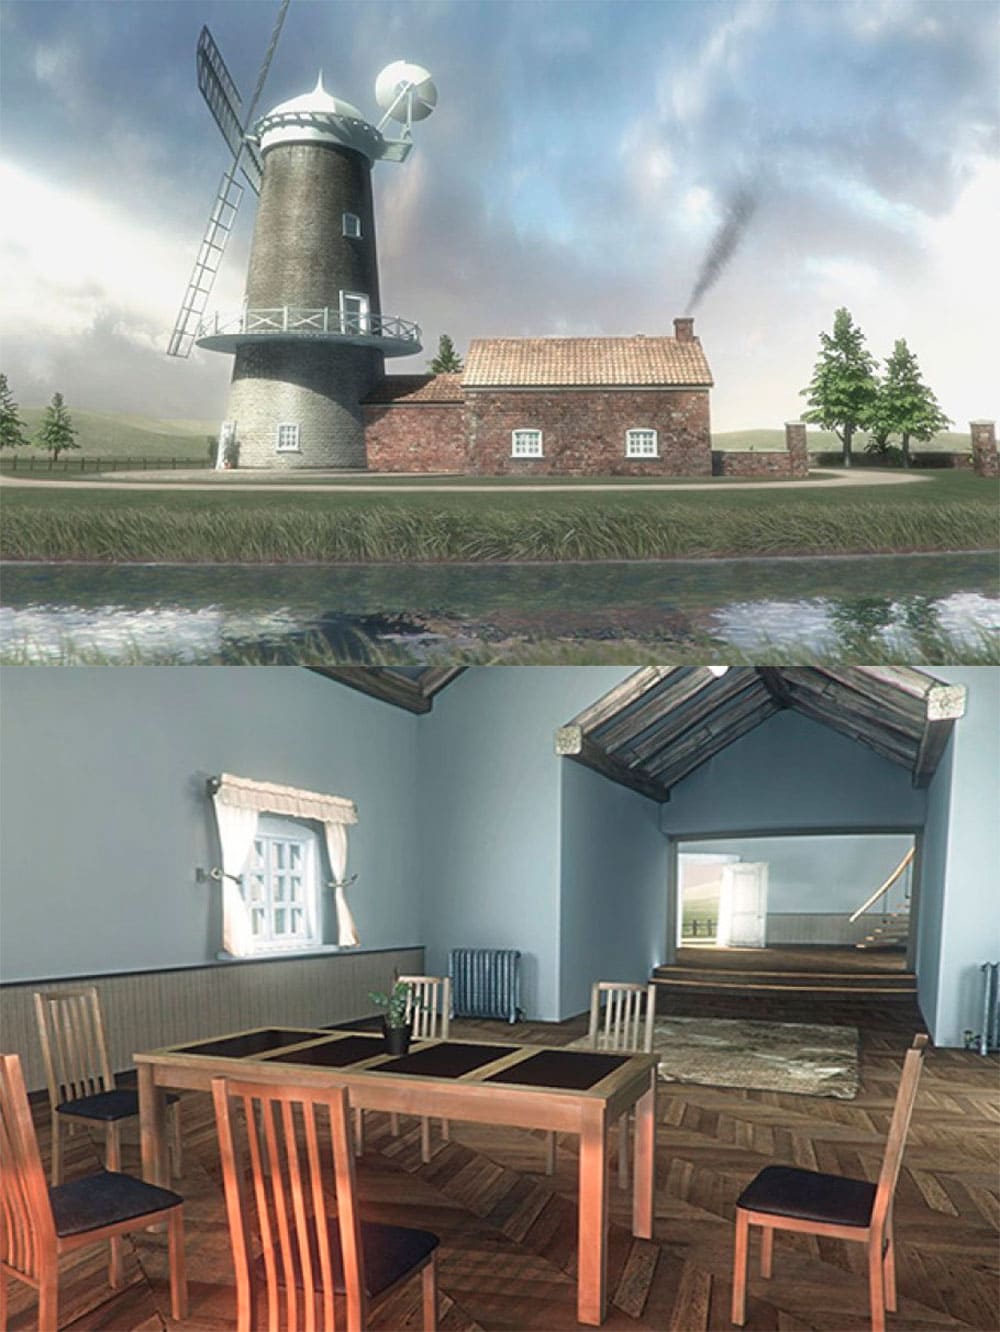 Windmill apartment, picture for pinterest.